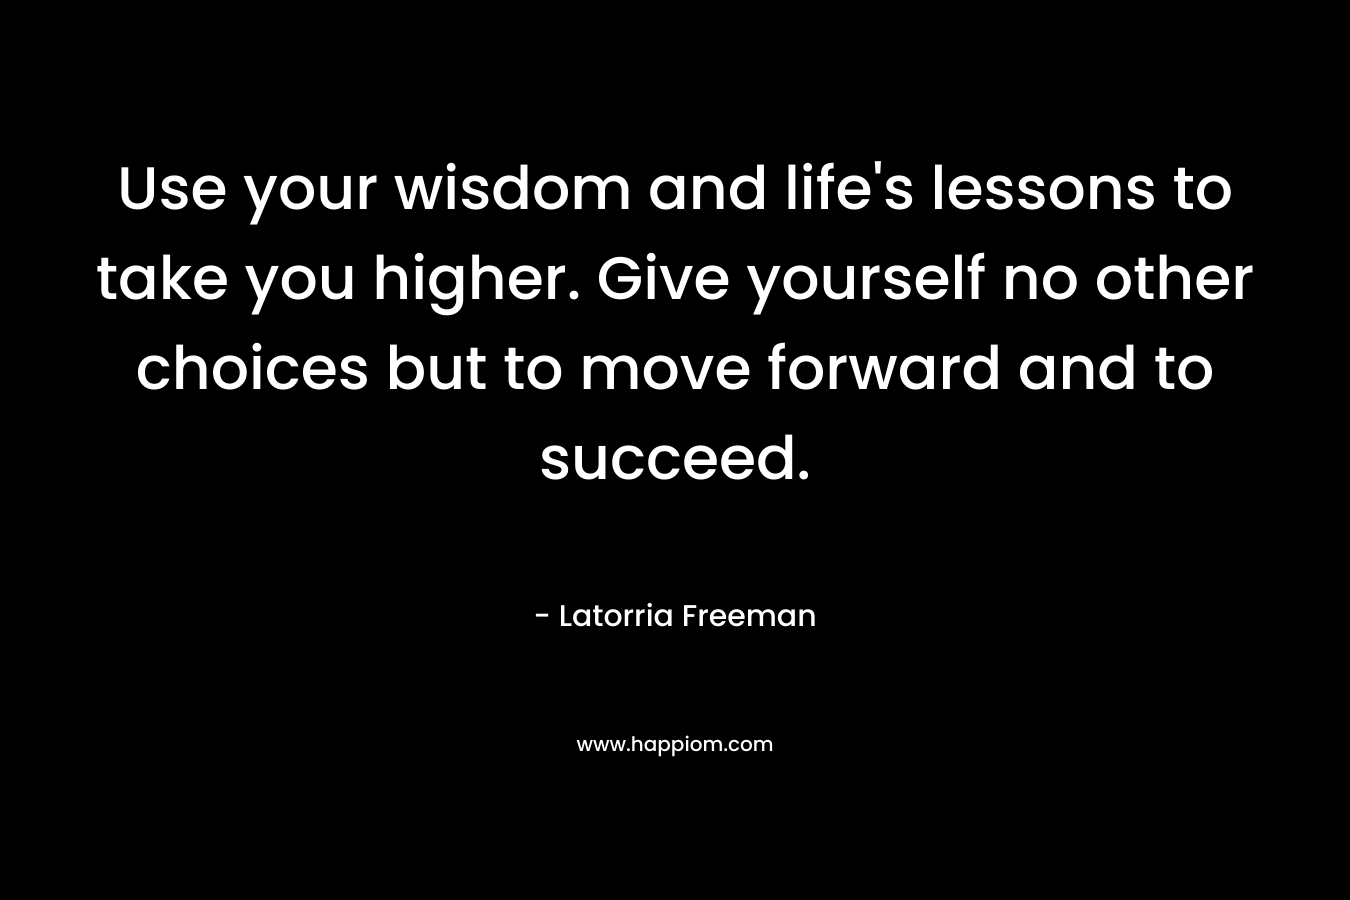 Use your wisdom and life's lessons to take you higher. Give yourself no other choices but to move forward and to succeed.